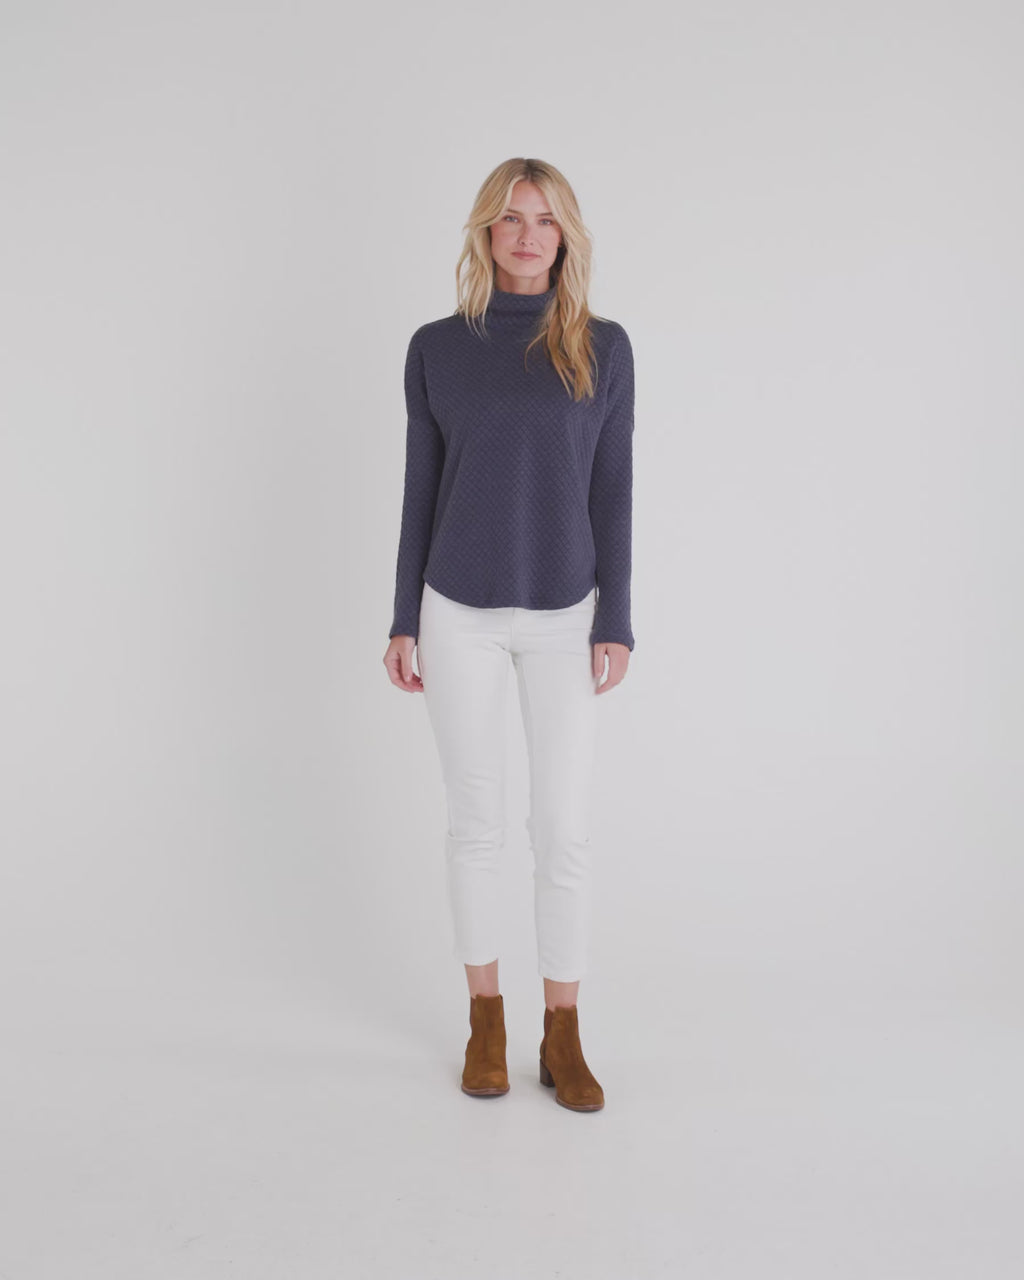 The video of the Southern Tide Mellie MockNeck Sweatshirt by Southern Tide - Nautical Navy